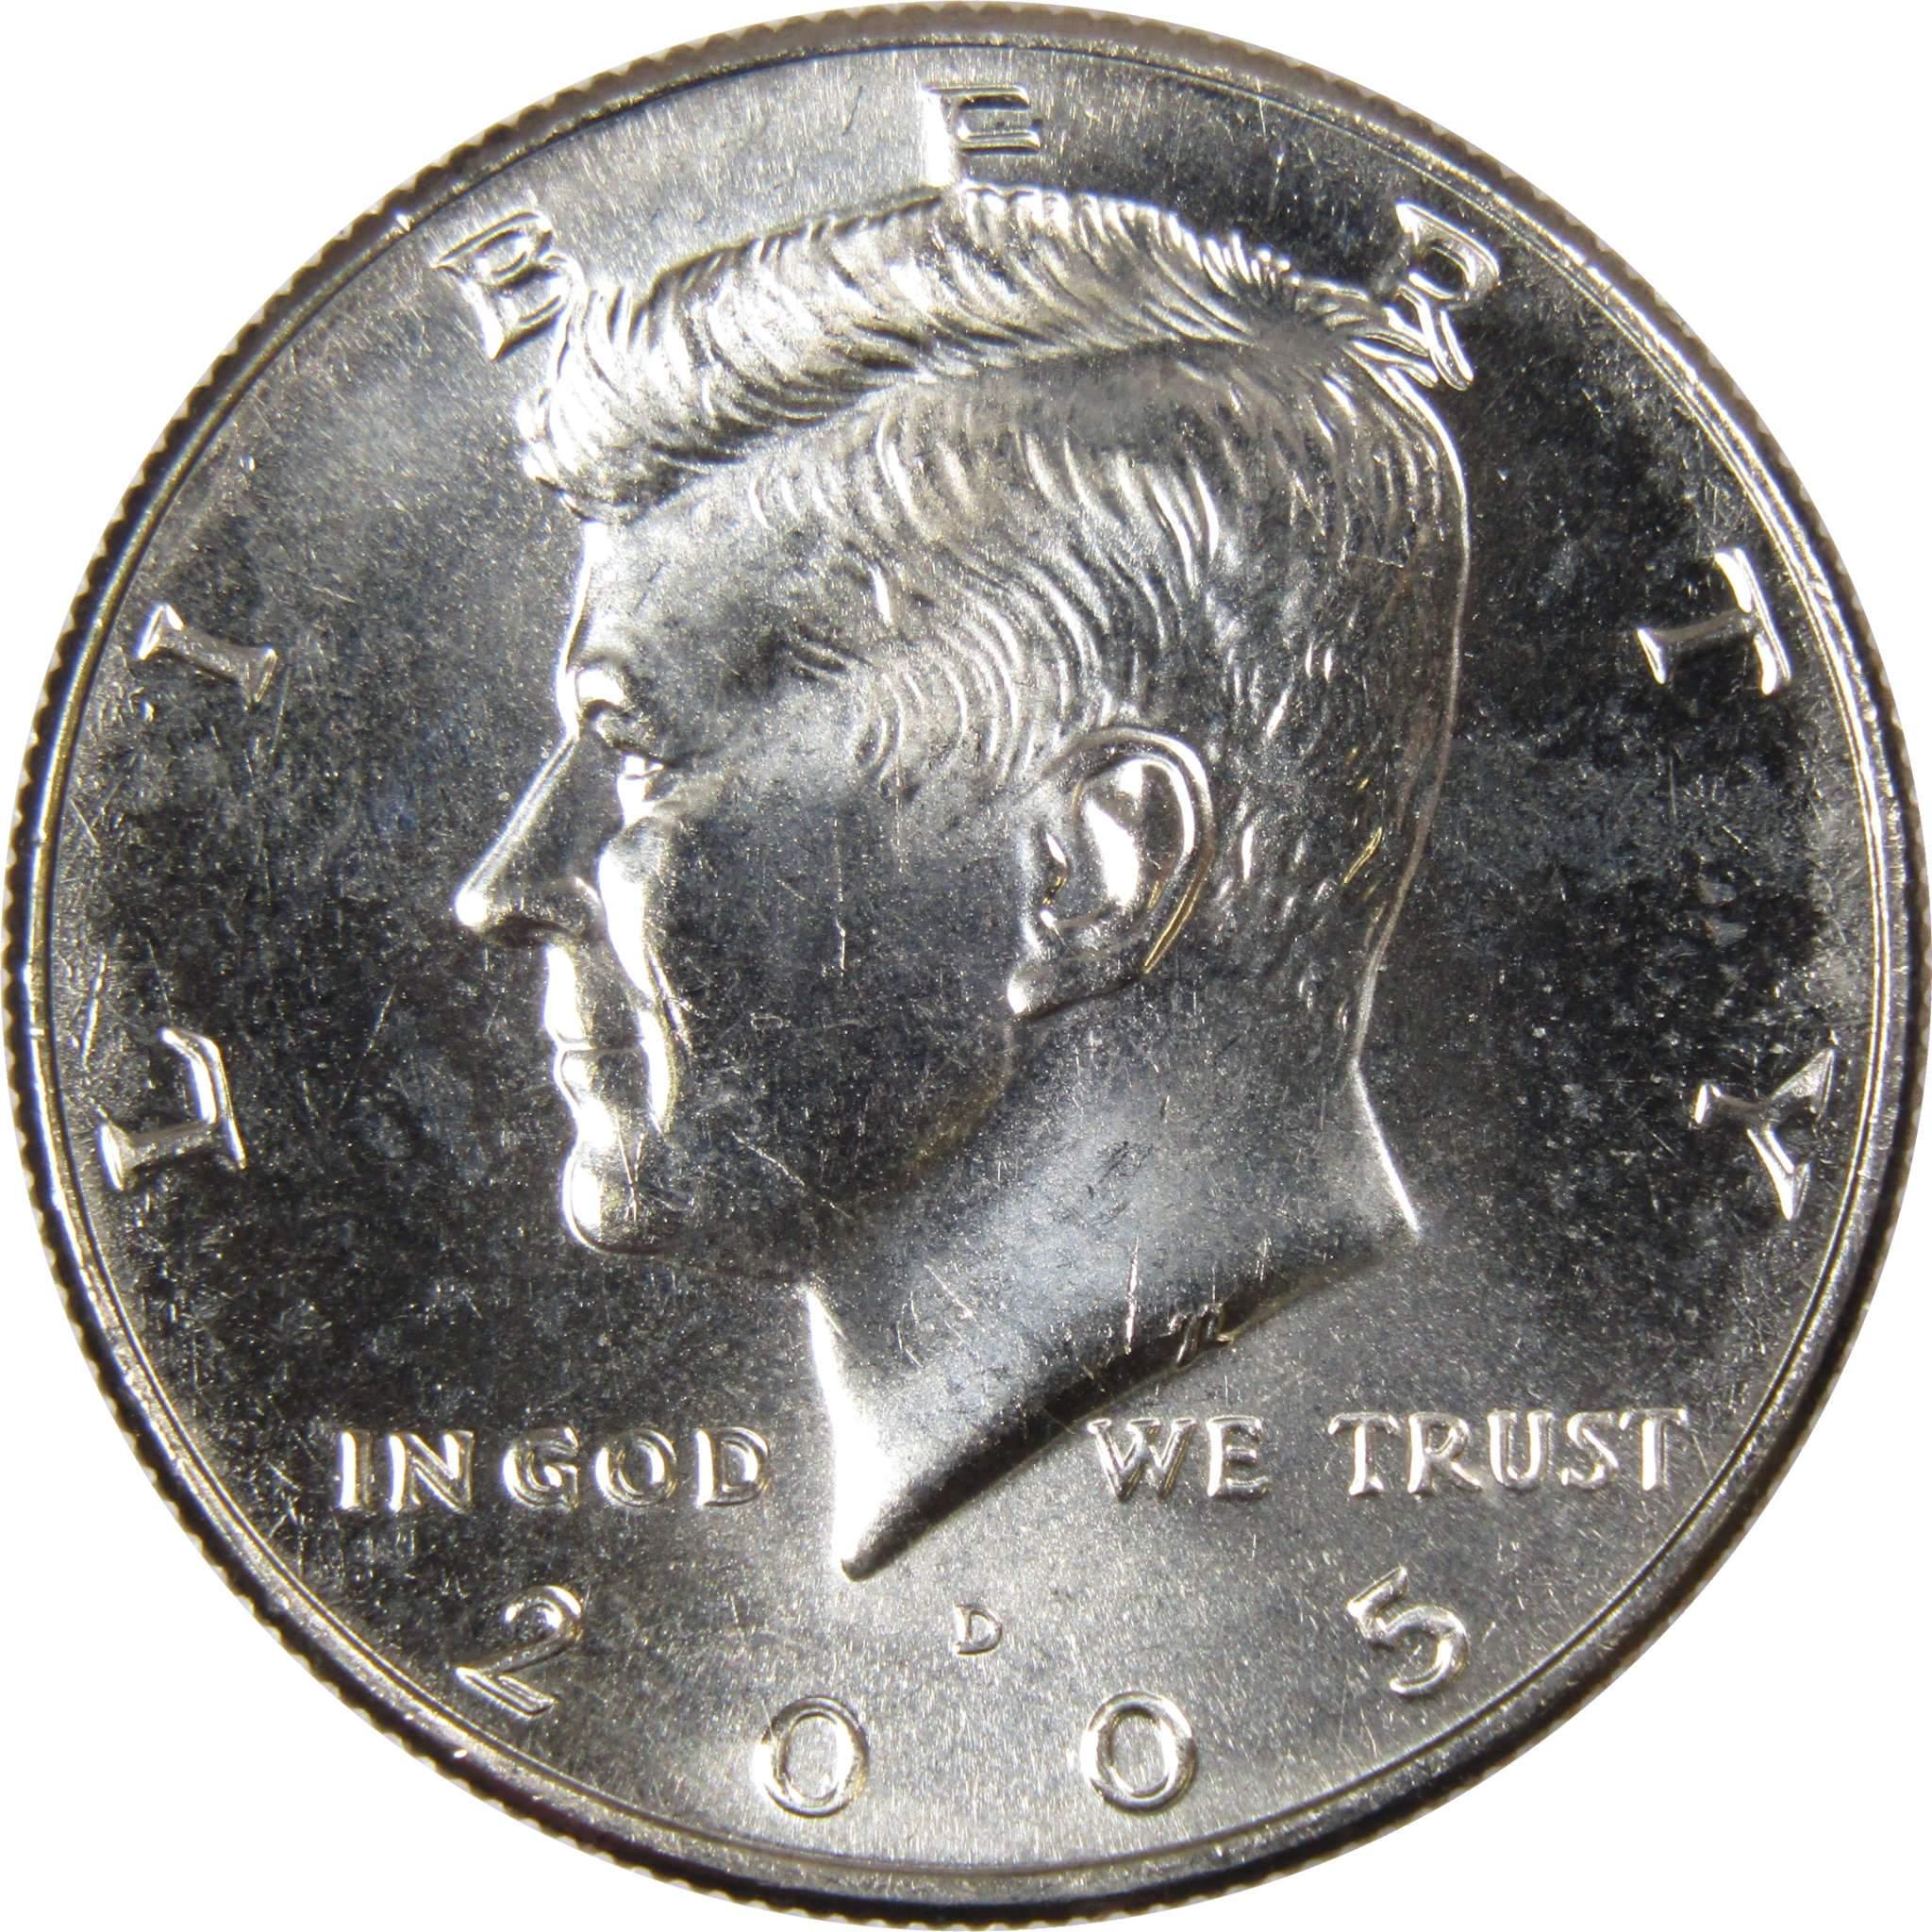 2005 D Kennedy Half Dollar BU Uncirculated Mint State 50c US Coin Collectible